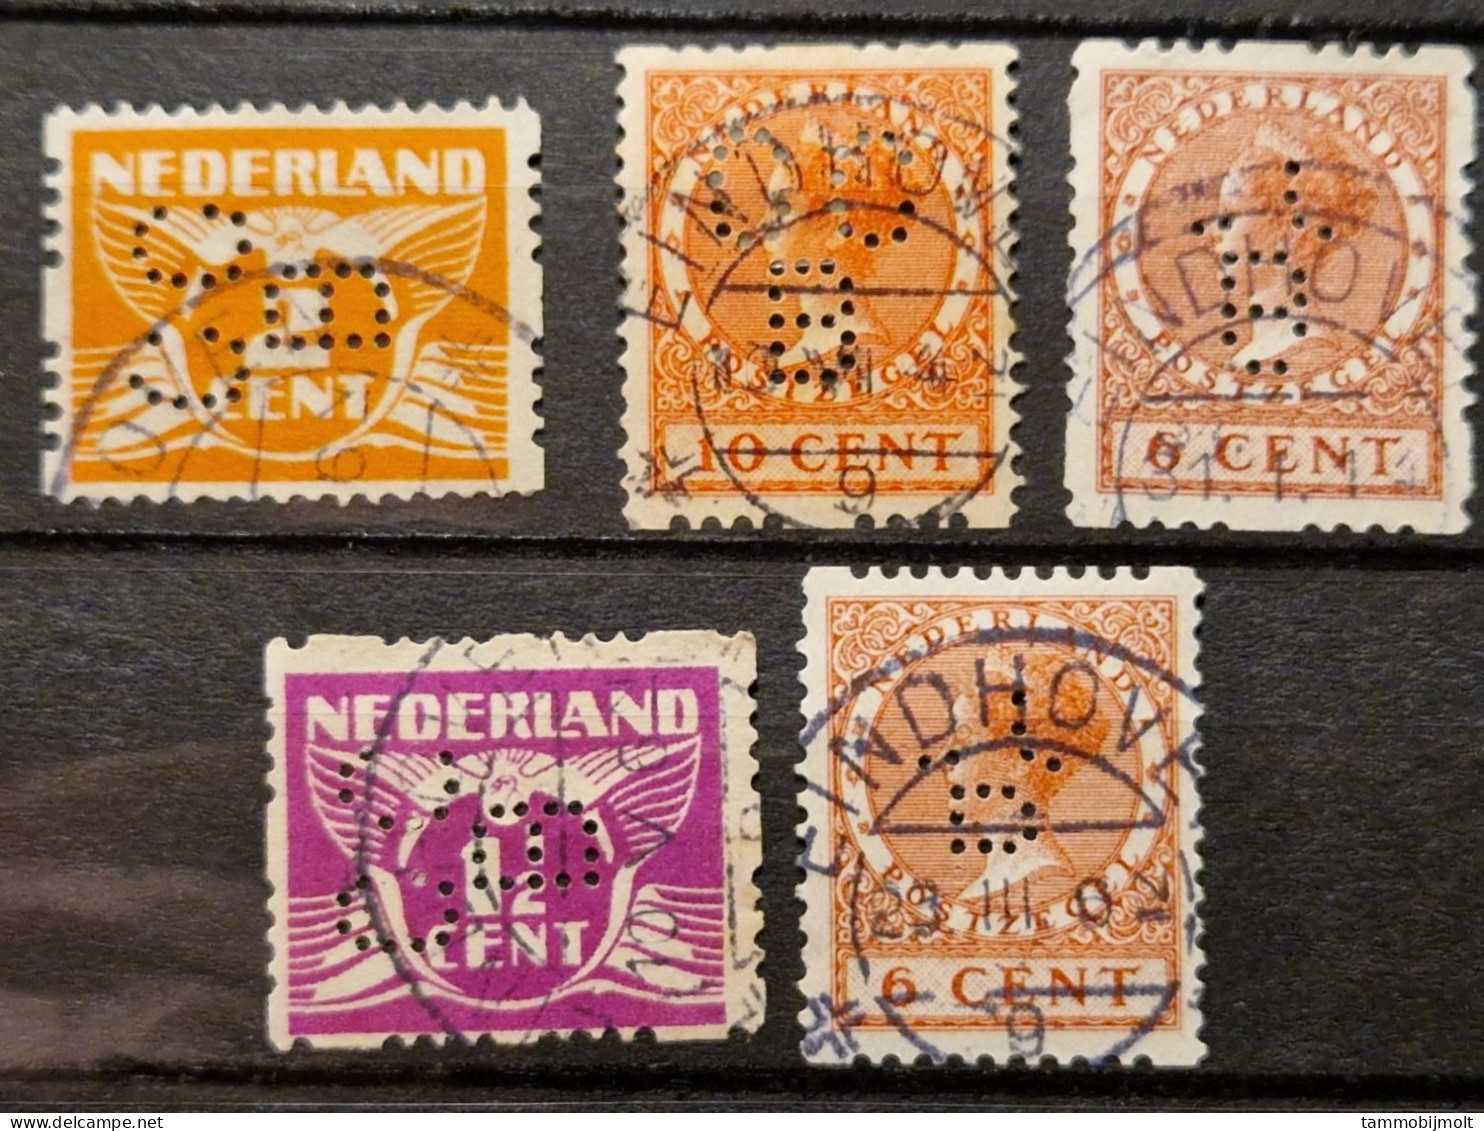 Netherlands, Nederland; Roltanding; POKO Perfins CCB; 5 Different Stamps - Unclassified